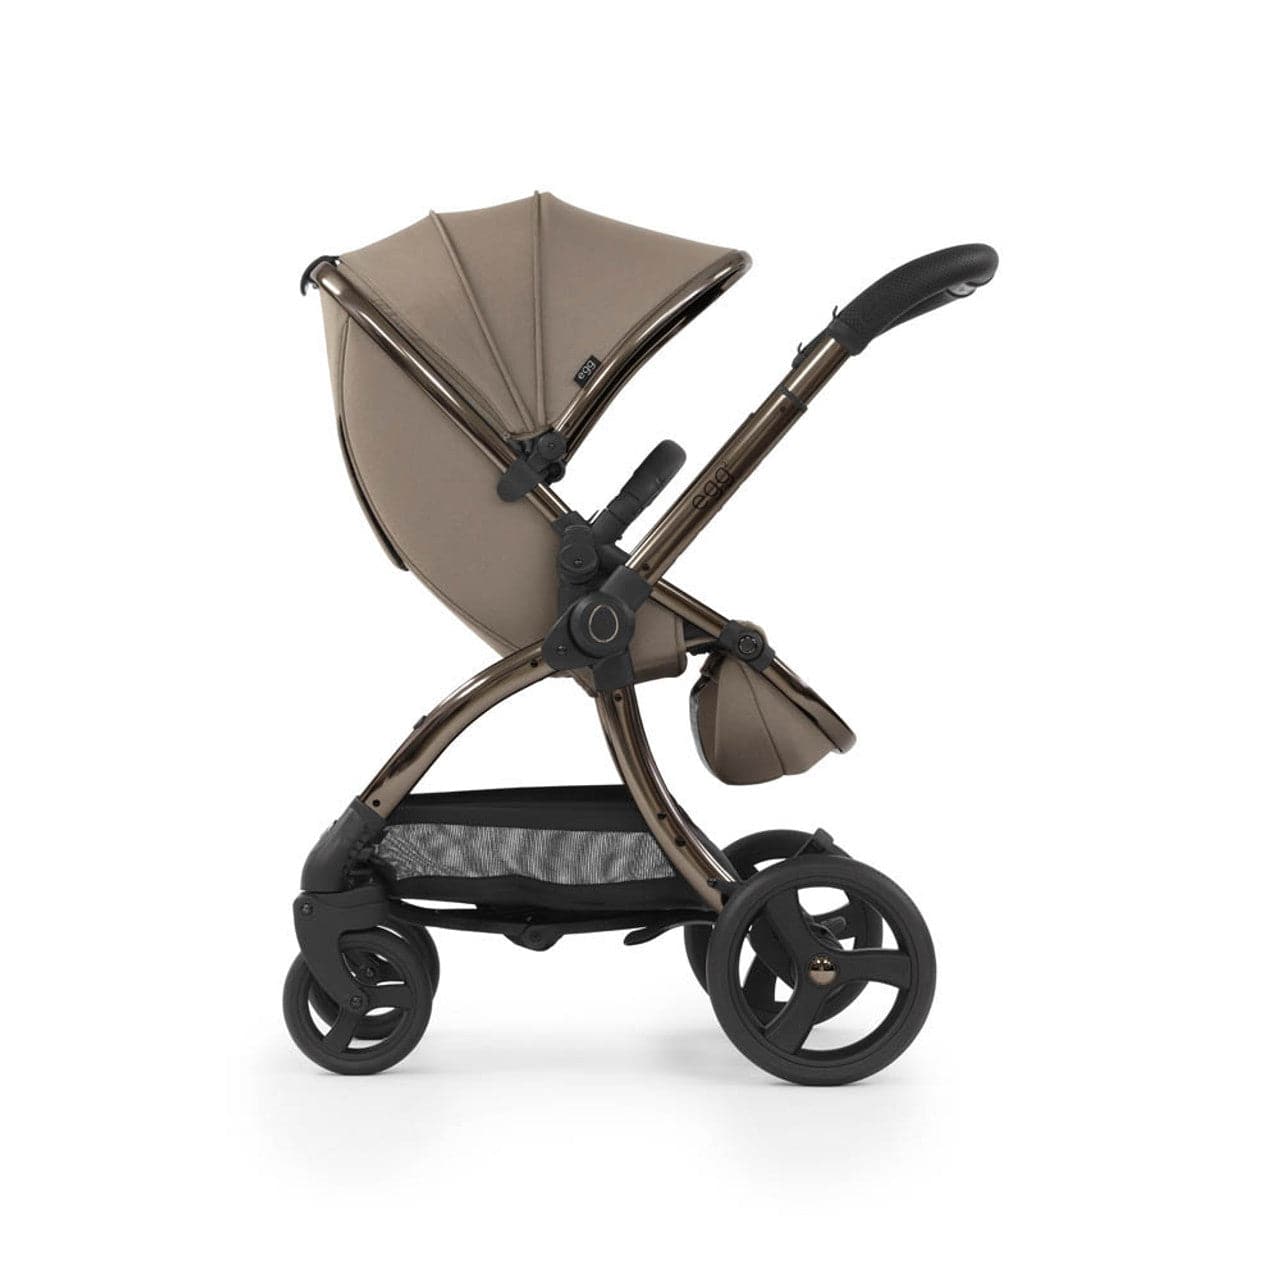 Egg® 2 Luxury Pebble 360 Pro i-Size Travel System Bundle - Mink - For Your Little One